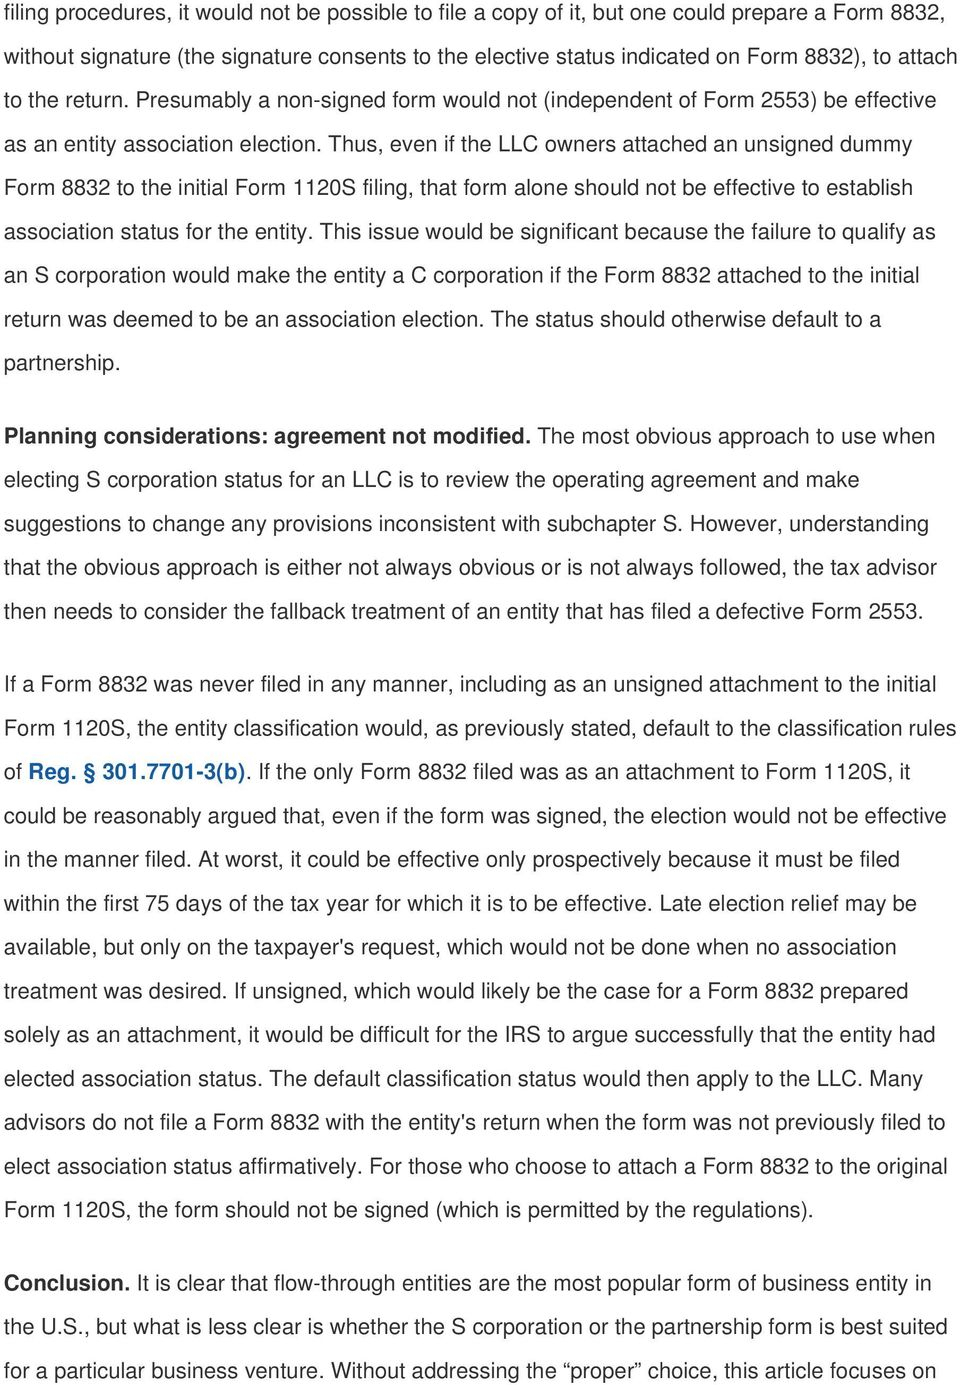 S Corp Operating Agreement Template Avoiding Traps When Electing S Corporation Status For An Llc Pdf